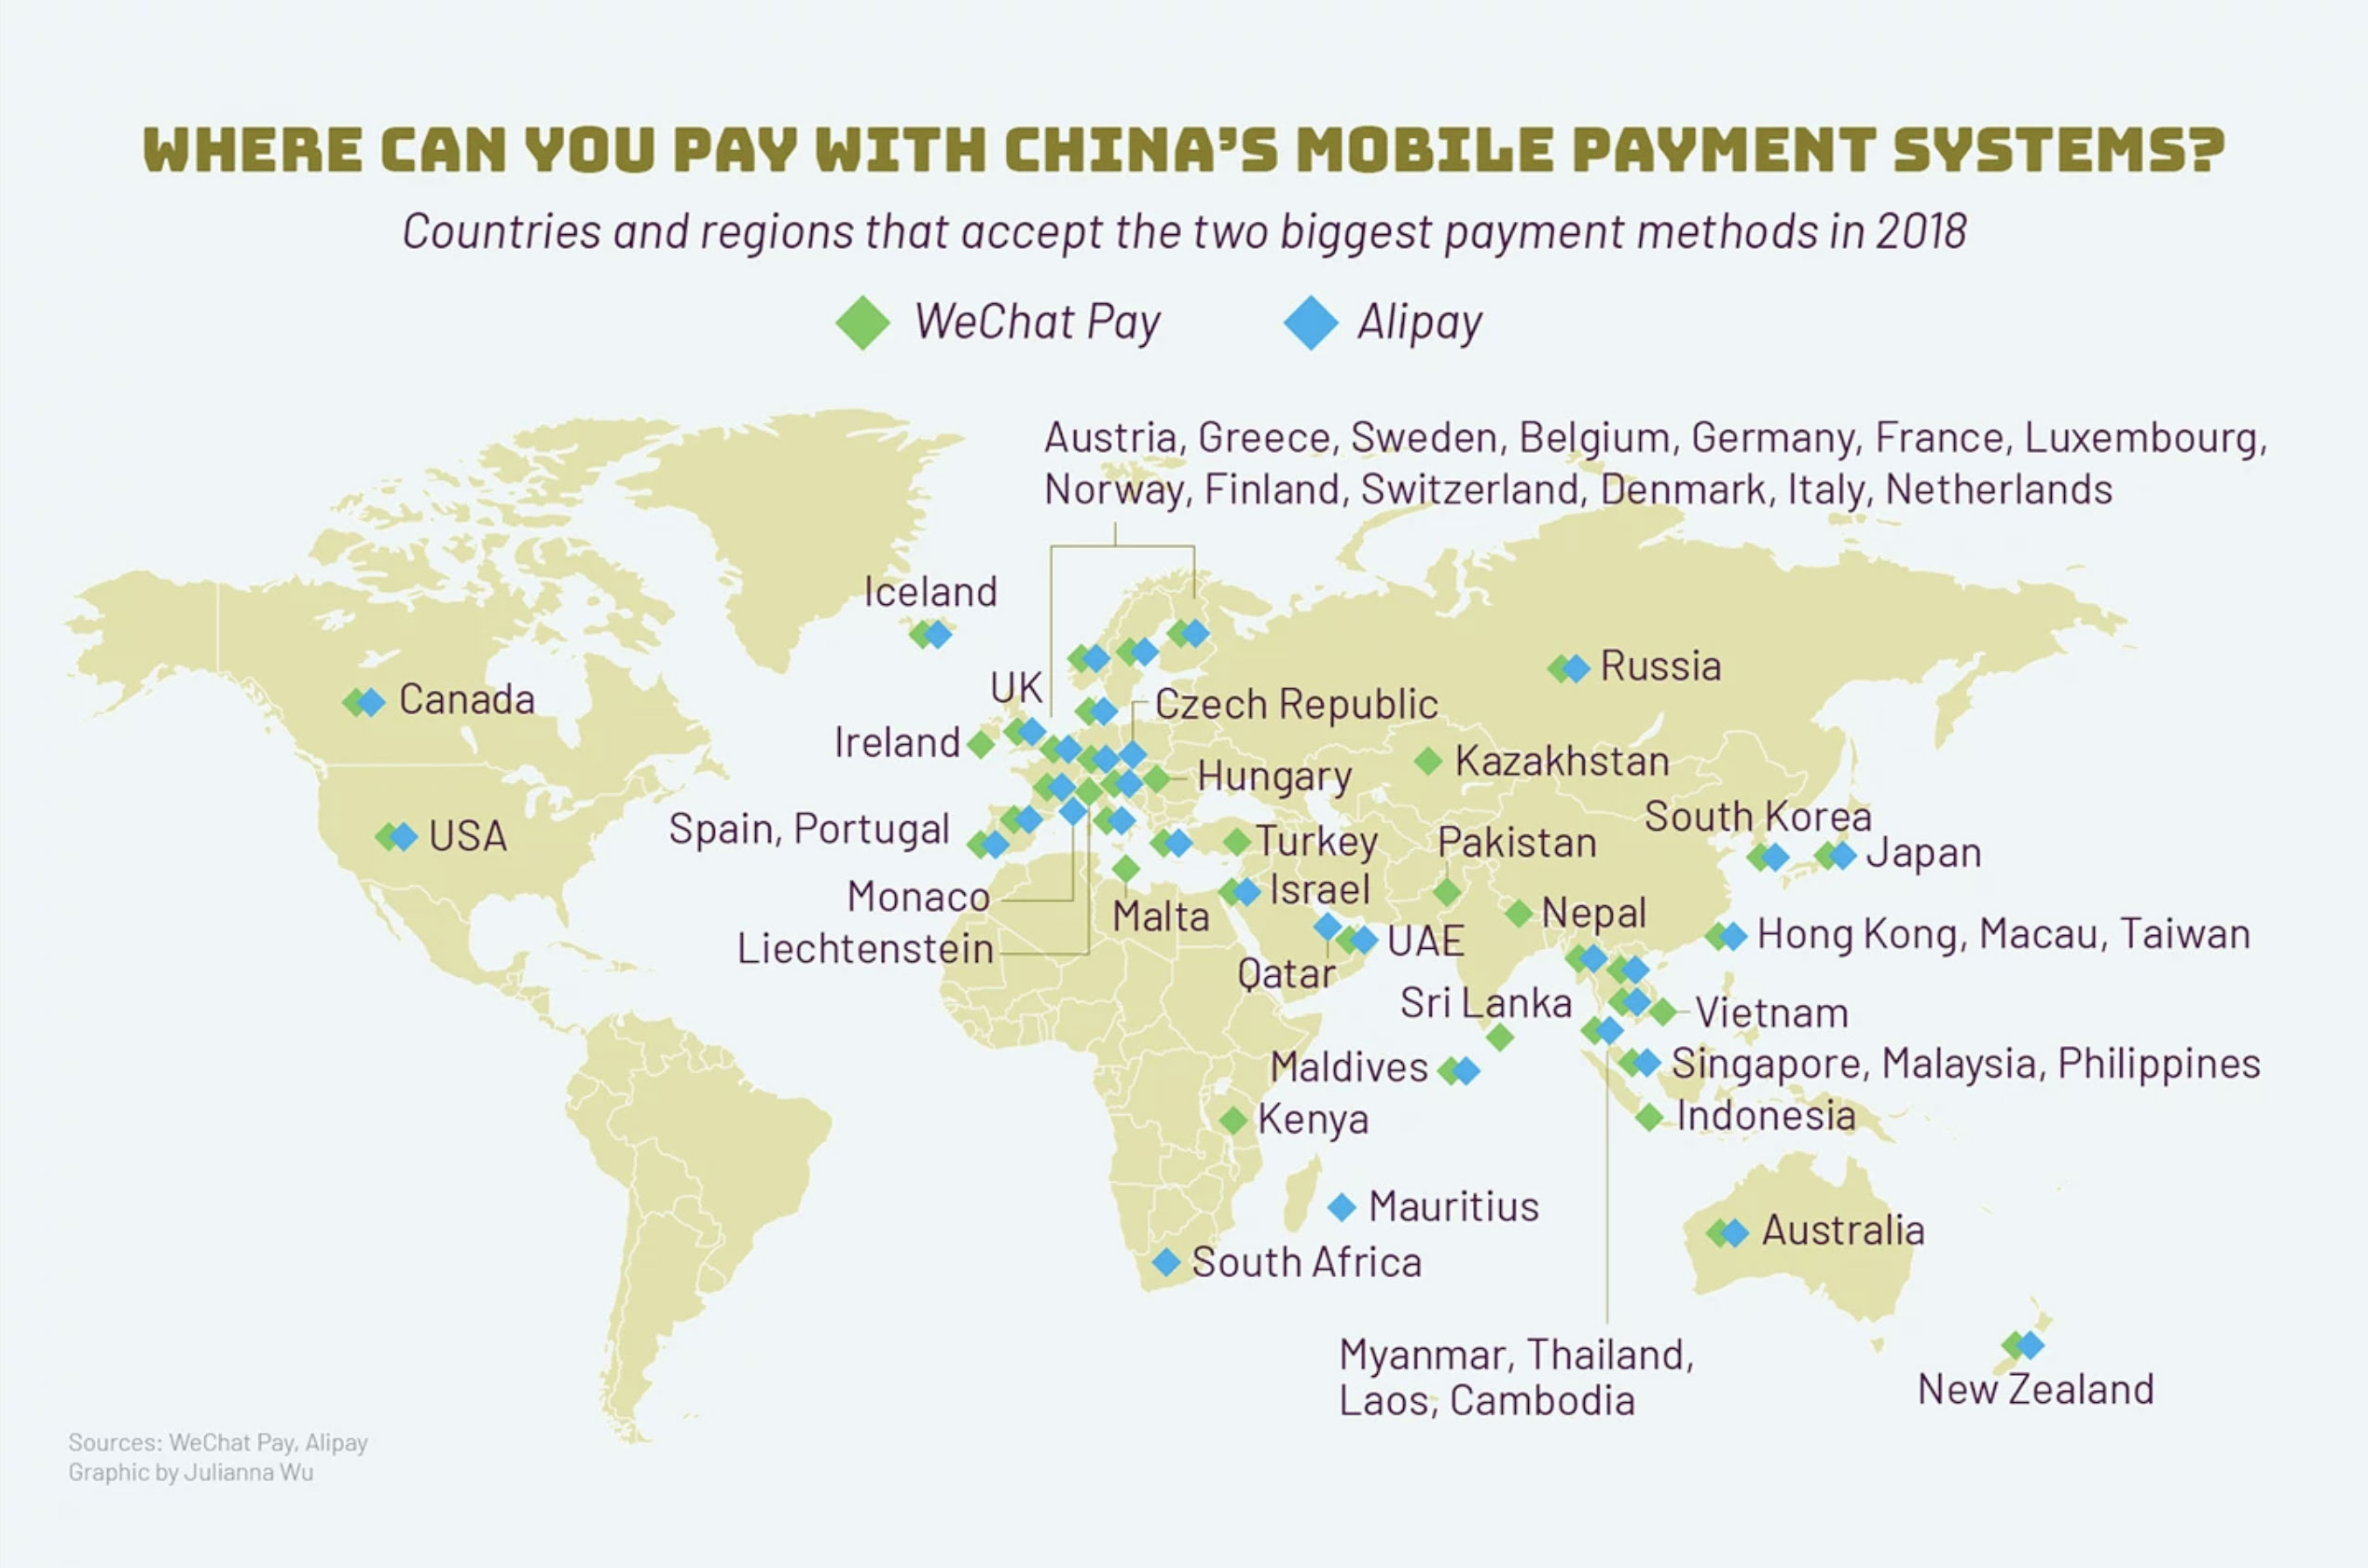 Countries accepting WeChat Pay and Alipay in 2018